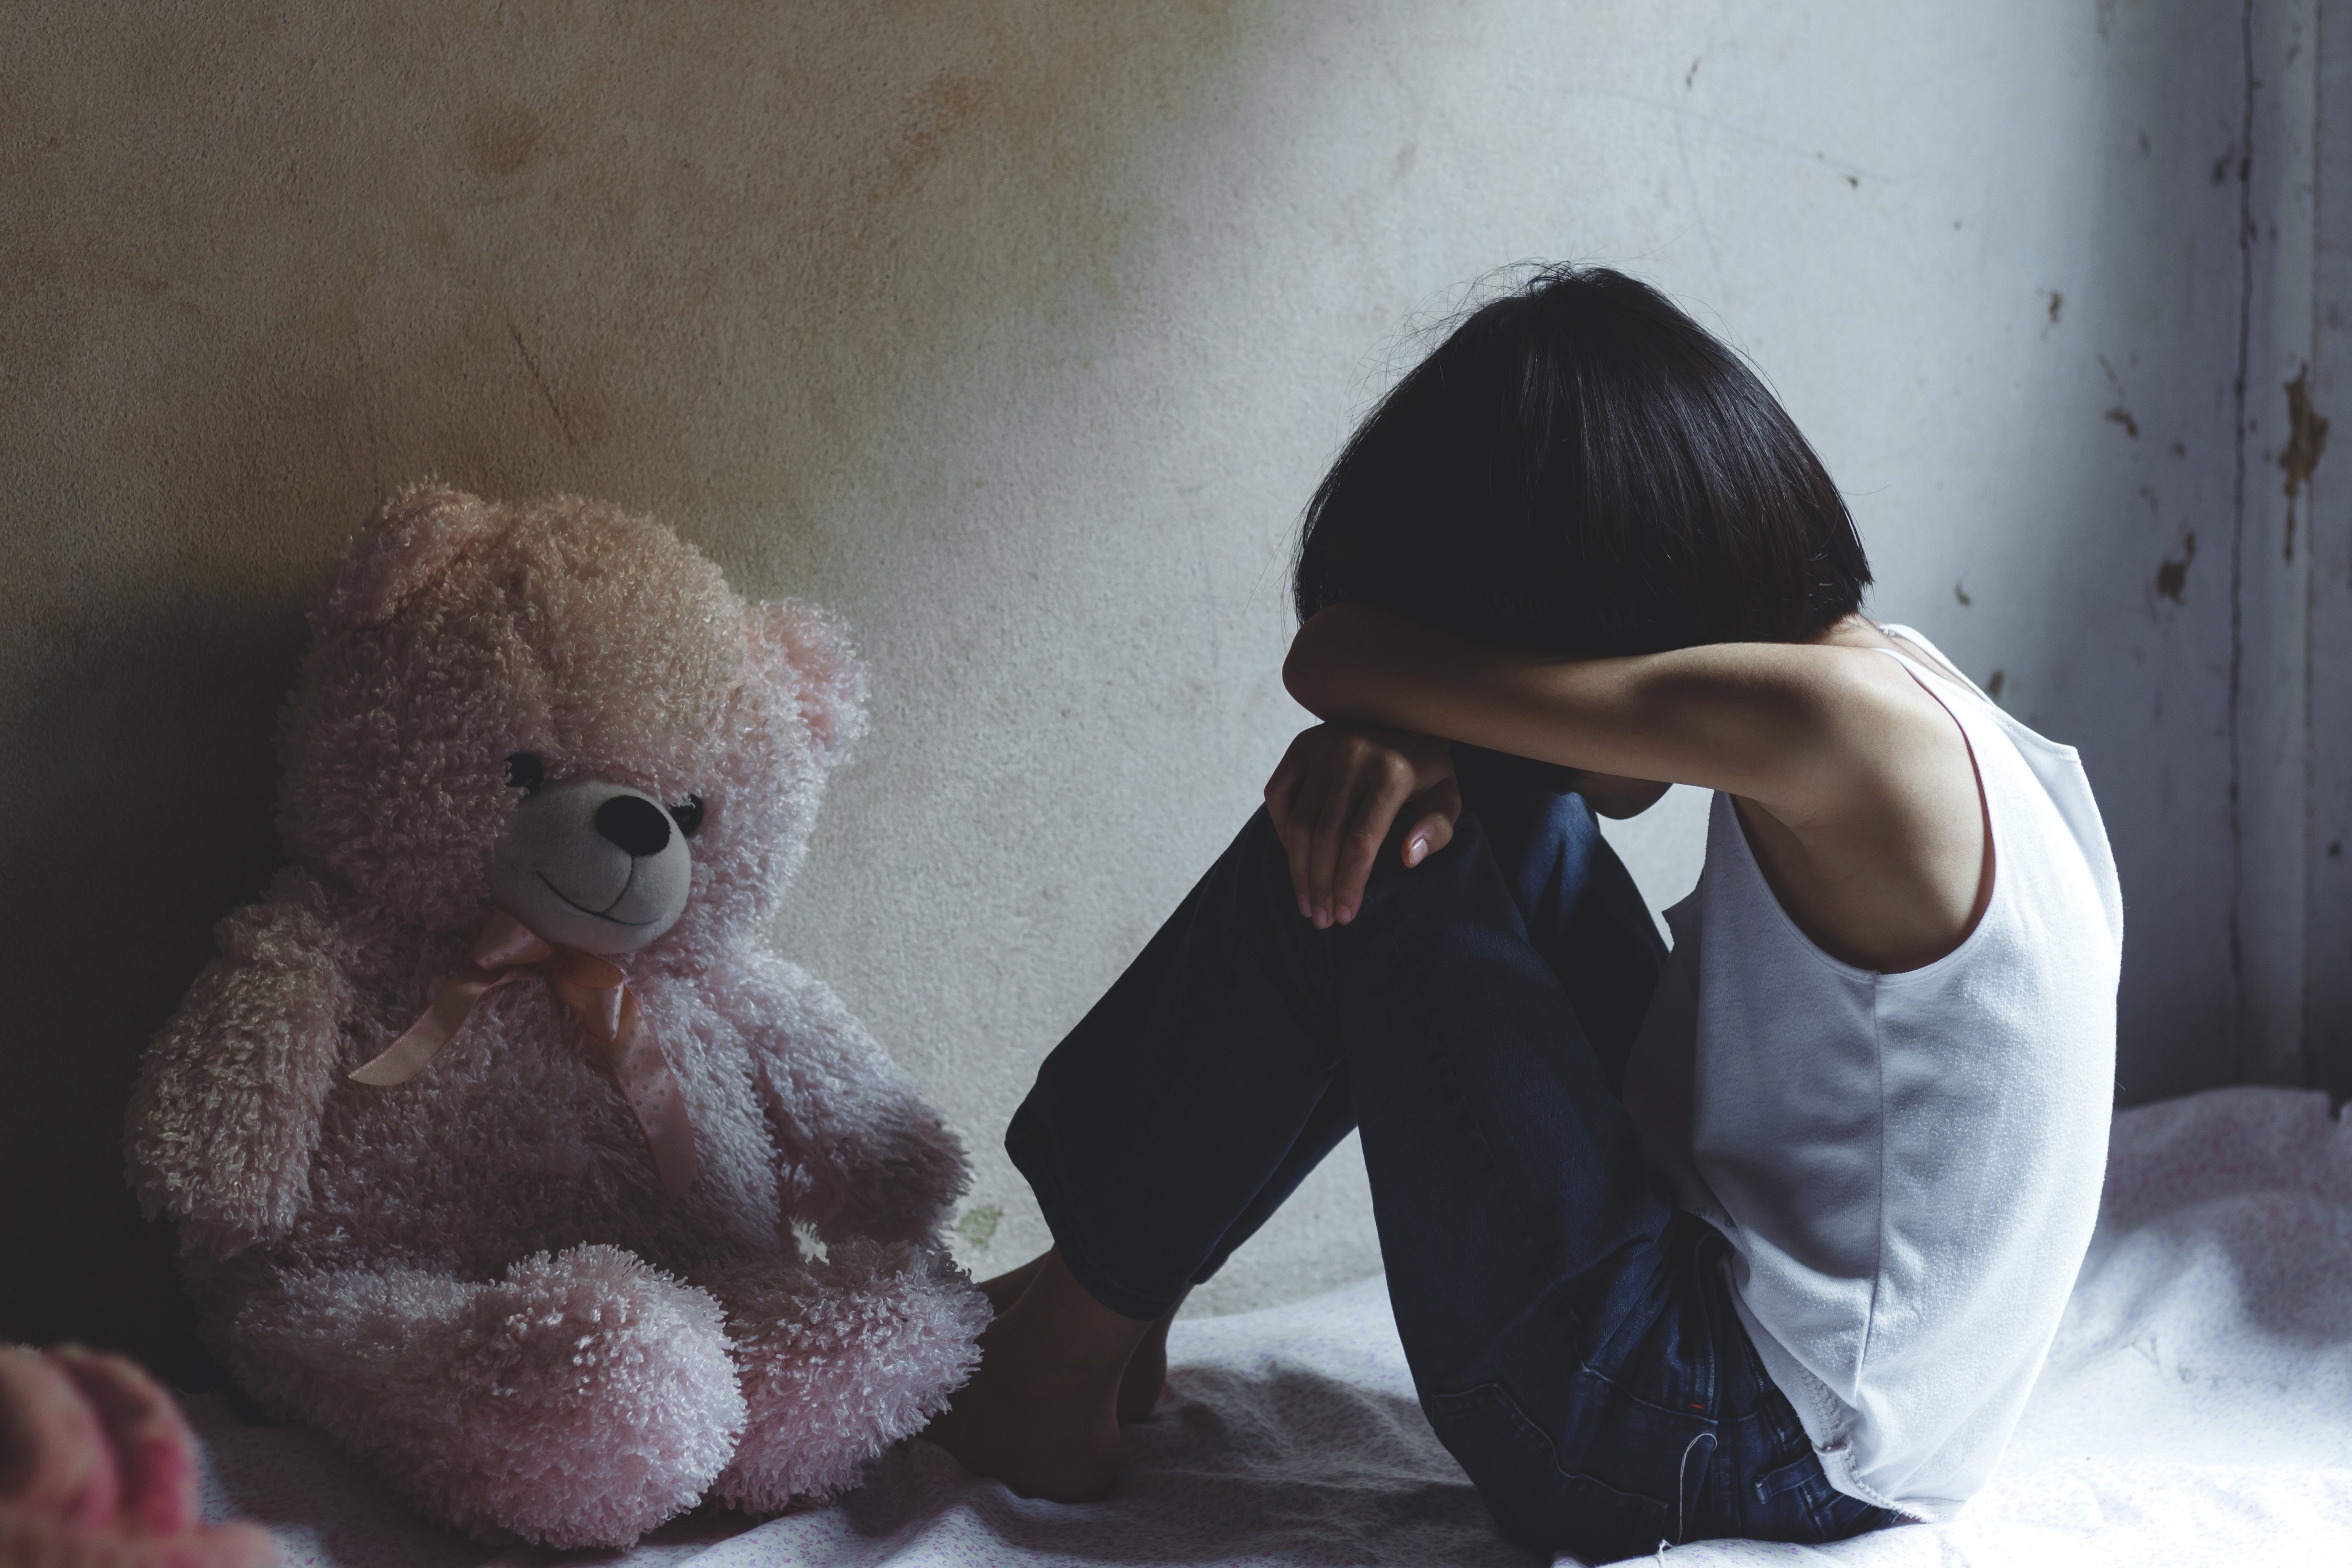 Bystanders face up to 20 years in prison if they fail to protect children or other vulnerable people from death under a new offence proposed by Hong Kong’s Law Reform Commission to close a legal loophole when perpetrators of abuse are difficult to identify. Photo: Shutterstock